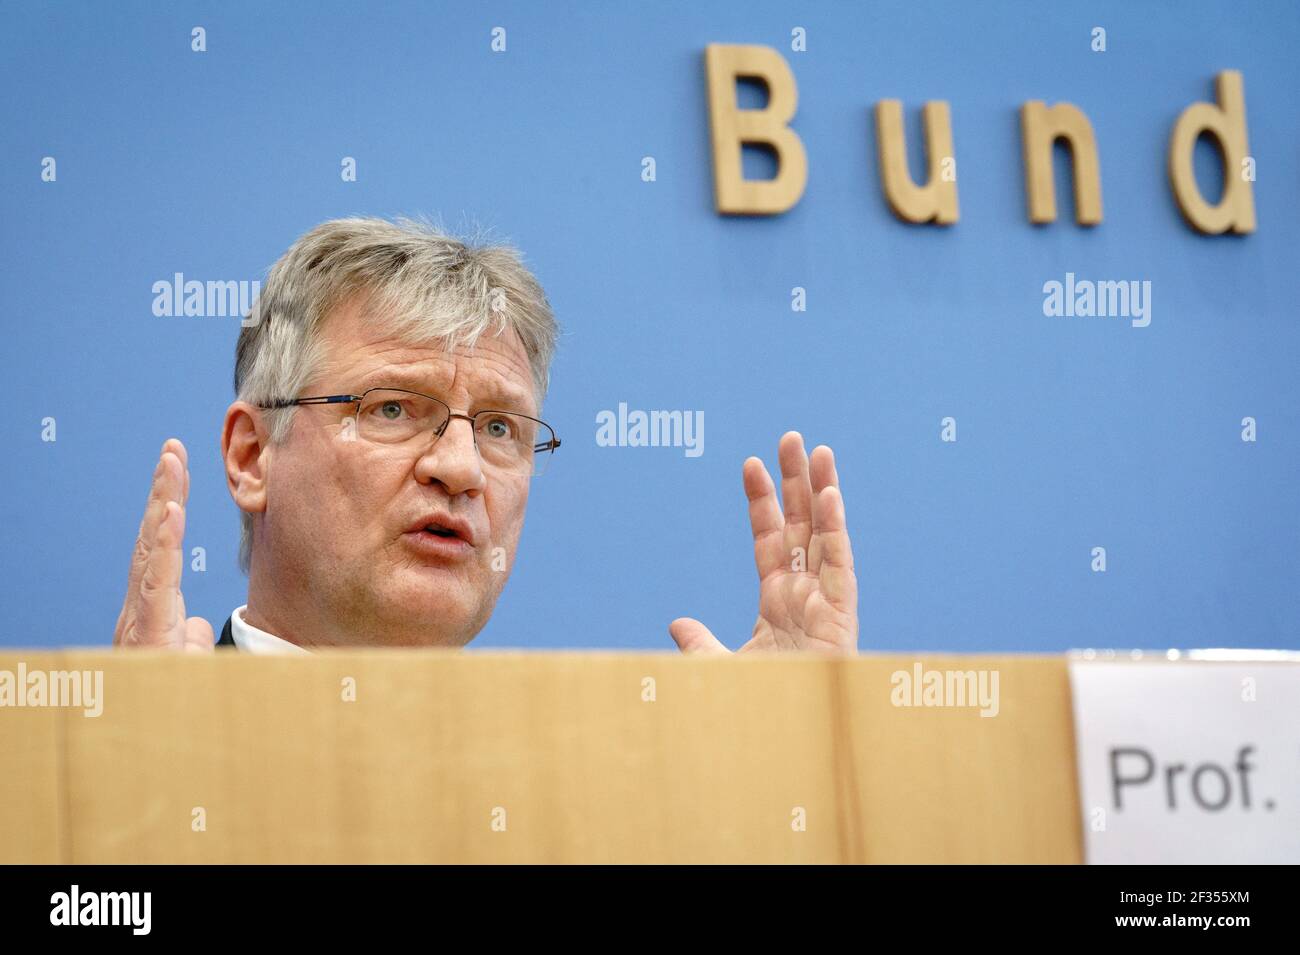 Berlin, Germany. 15th Mar, 2021. Jörg Meuthen, MEP, AfD national spokesman, gives a press conference after the state elections in Baden-Württemberg and Rhineland-Palatinate. Credit: Kay Nietfeld/dpa/Alamy Live News Stock Photo